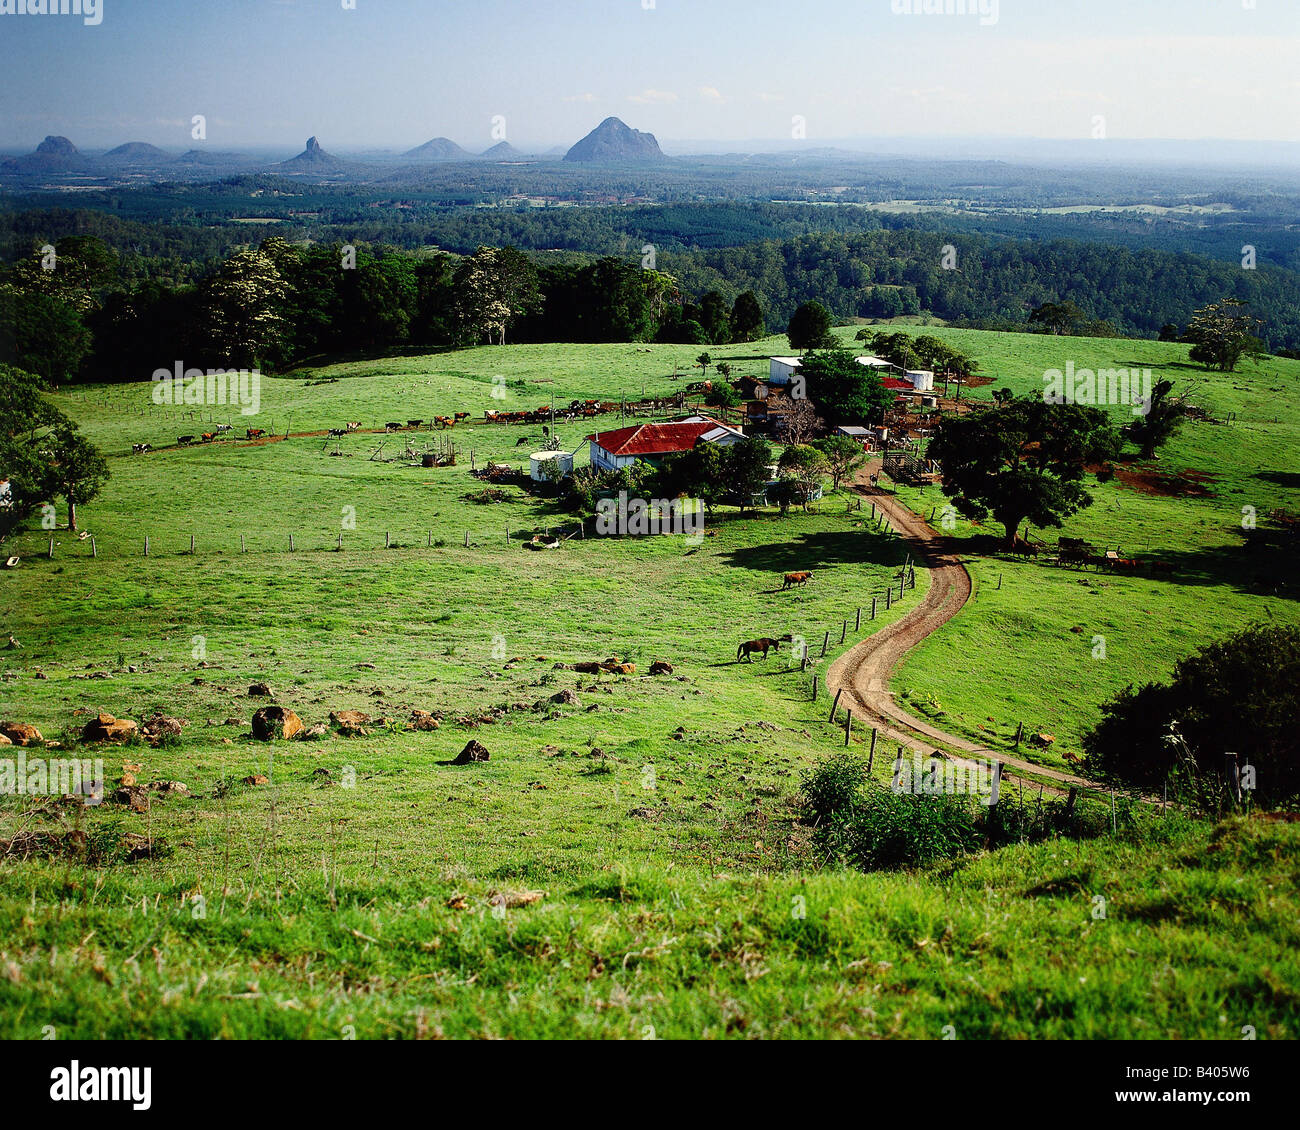 geography / travel , Australia, Queensland, farming / agriculture, landscape, landscapes with farm at Maleny, meadows, pastures, Stock Photo